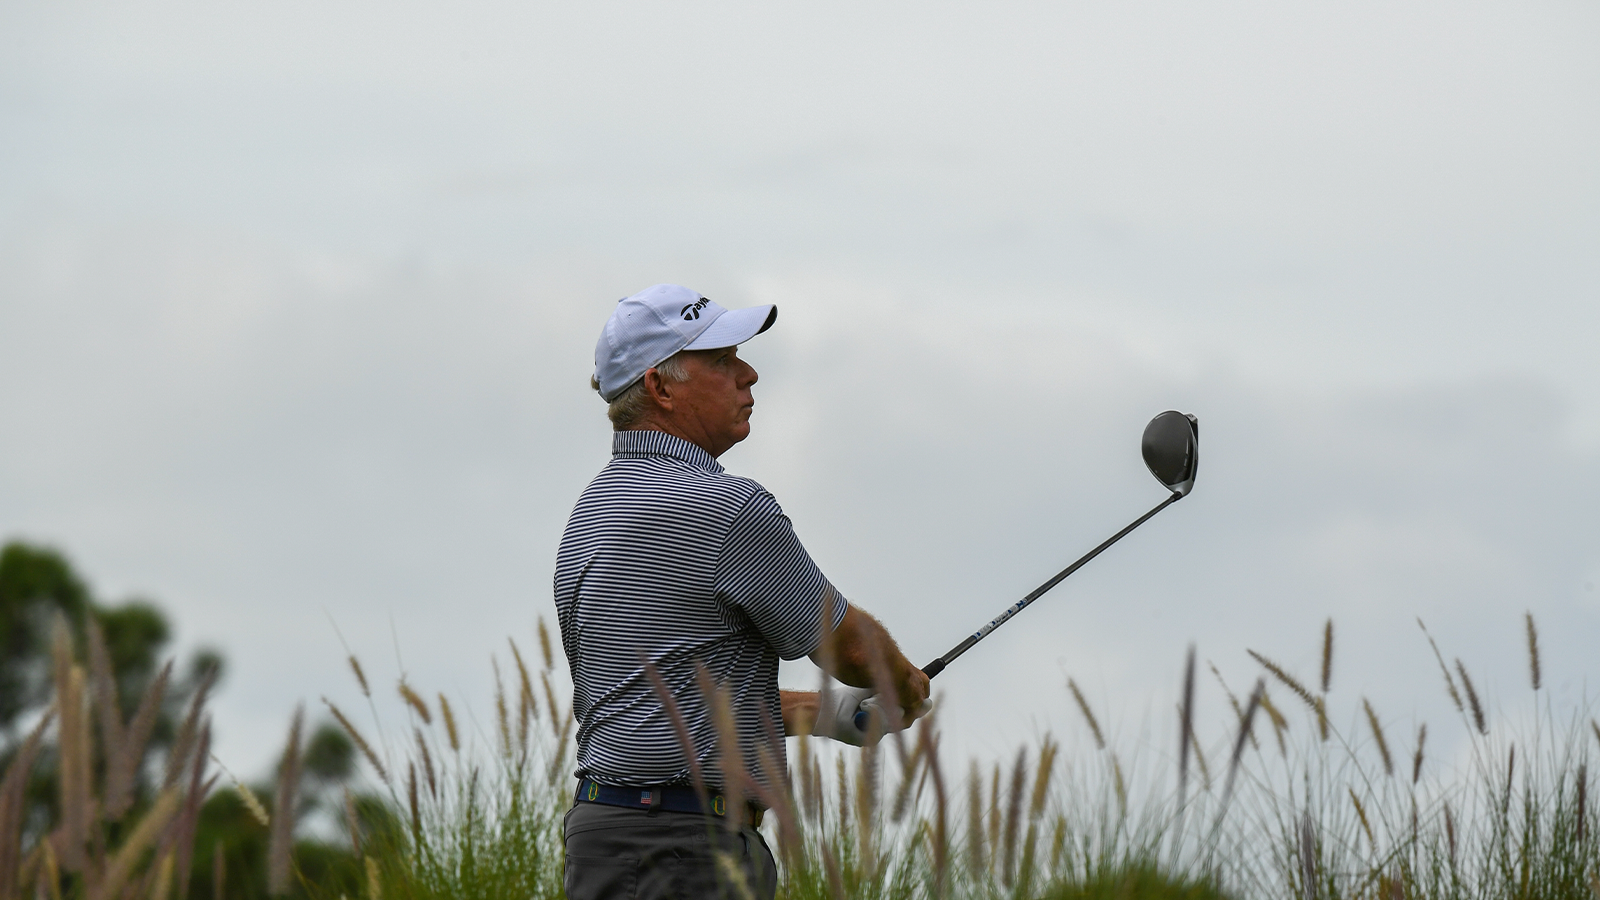 Brad Lardon hits his tee shot on the 18th hole during the third round of the 33rd Senior PGA Professional Championship held at the PGA Golf Club on October 23, 2021 in Port St. Lucie, Florida. (Photo by Montana Pritchard/PGA of America)